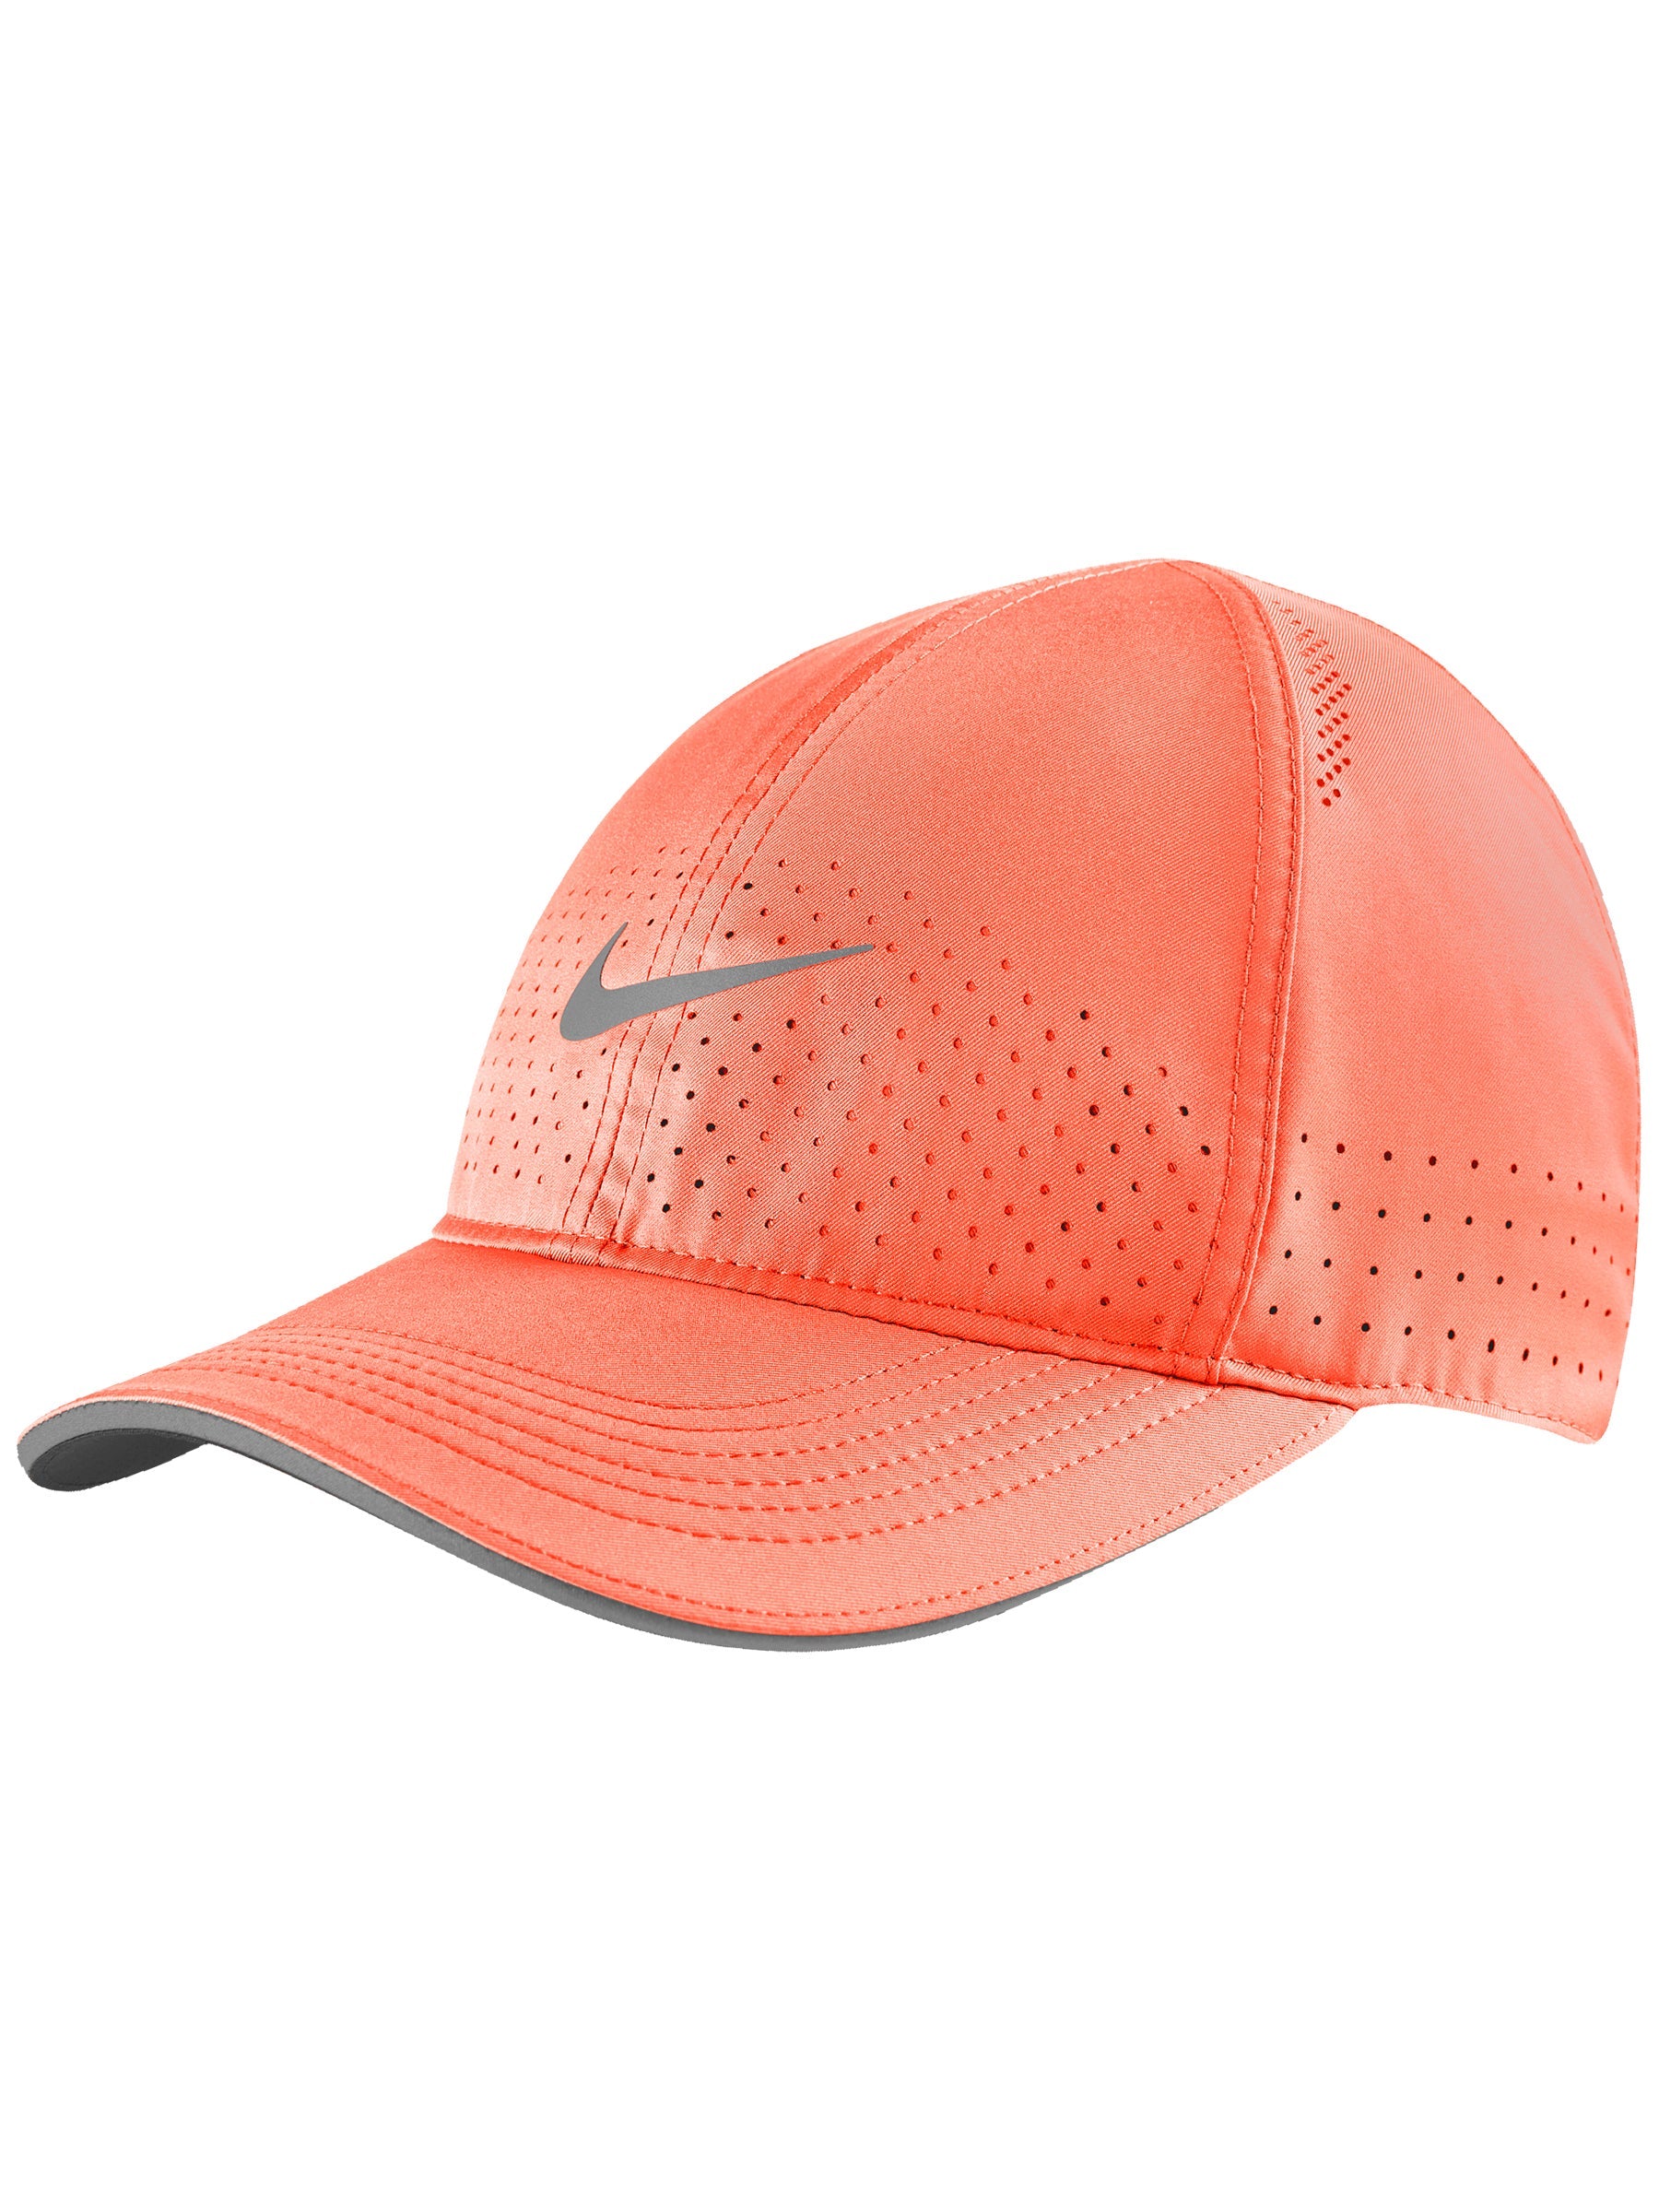 Nike Dri-FIT Aerobill Featherlight Perforated Running Cap, by Nike, Price: R 499,9, PLU 1156348